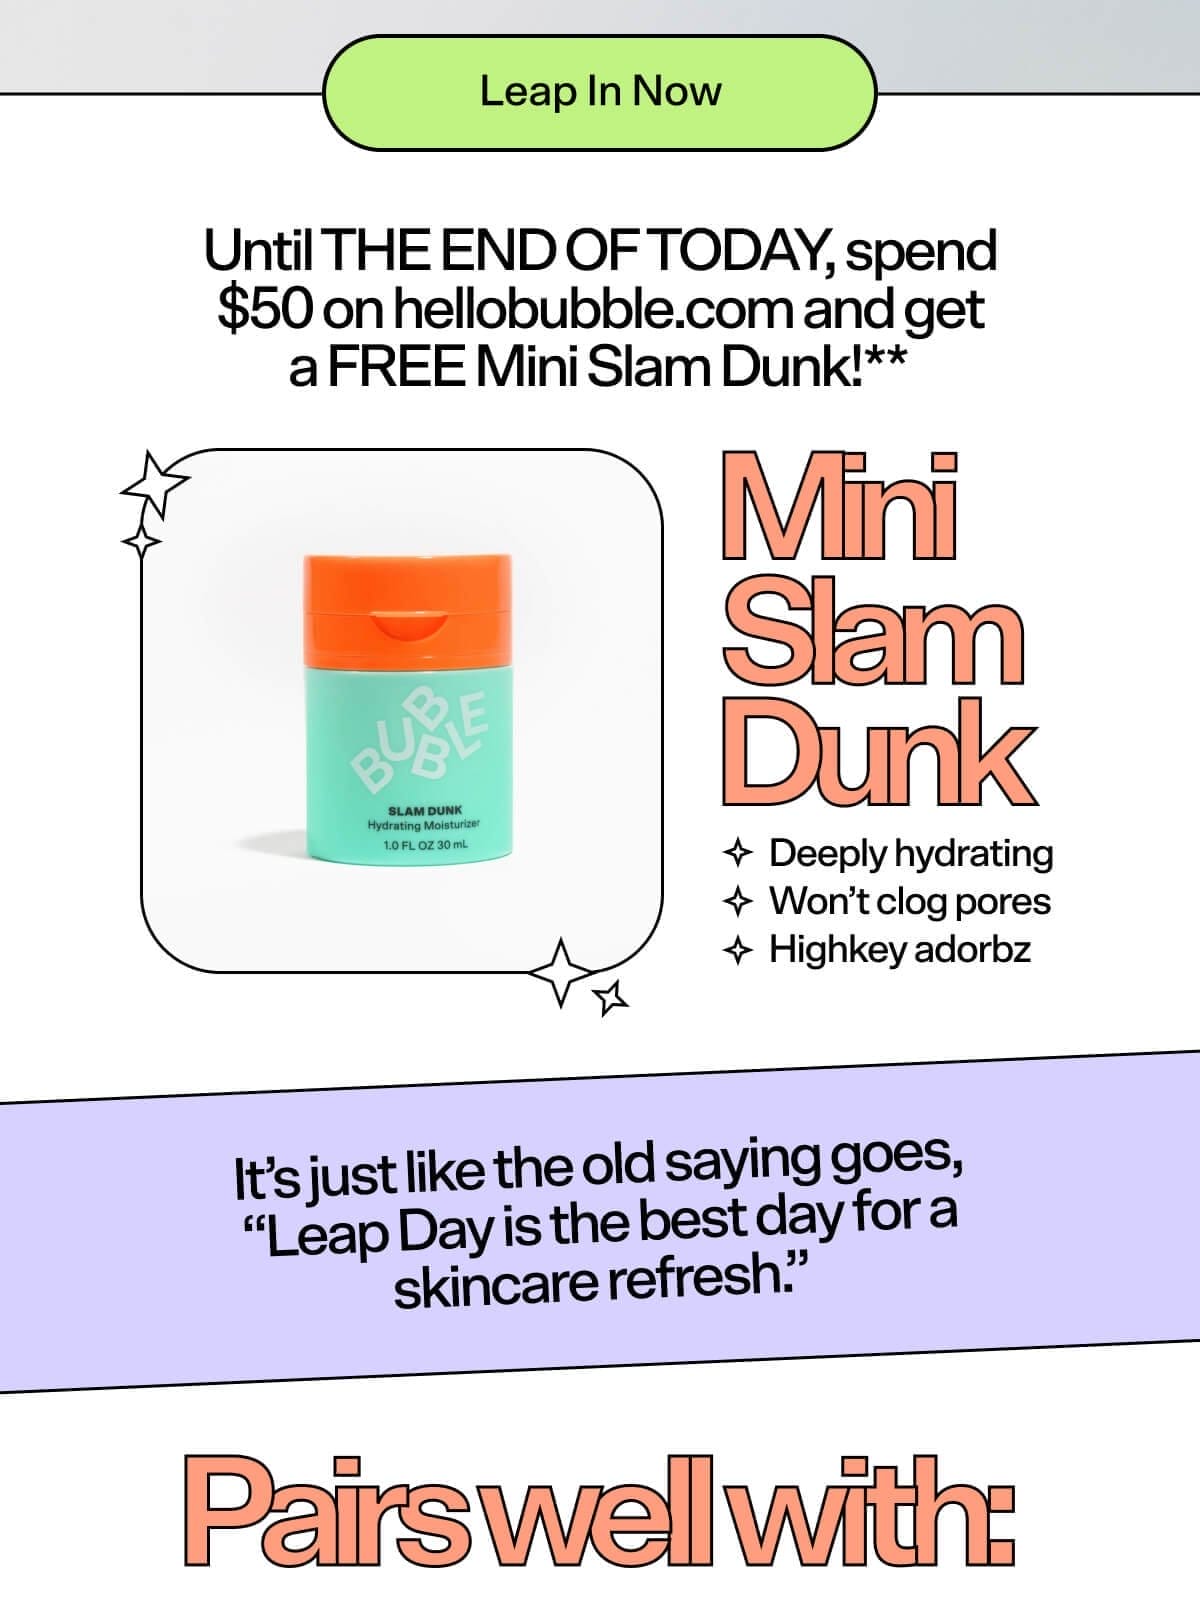 Until THE END OF TODAY, spend \\$50 on hellobubble.com and get a FREE Mini Slam Dunk!** It’s just like the old saying goes, “Leap Day is the best day for a skincare refresh.” Mini Slam Dunk Deeply hydrating Won’t clog pores Highkey adorbz Pairs well with: